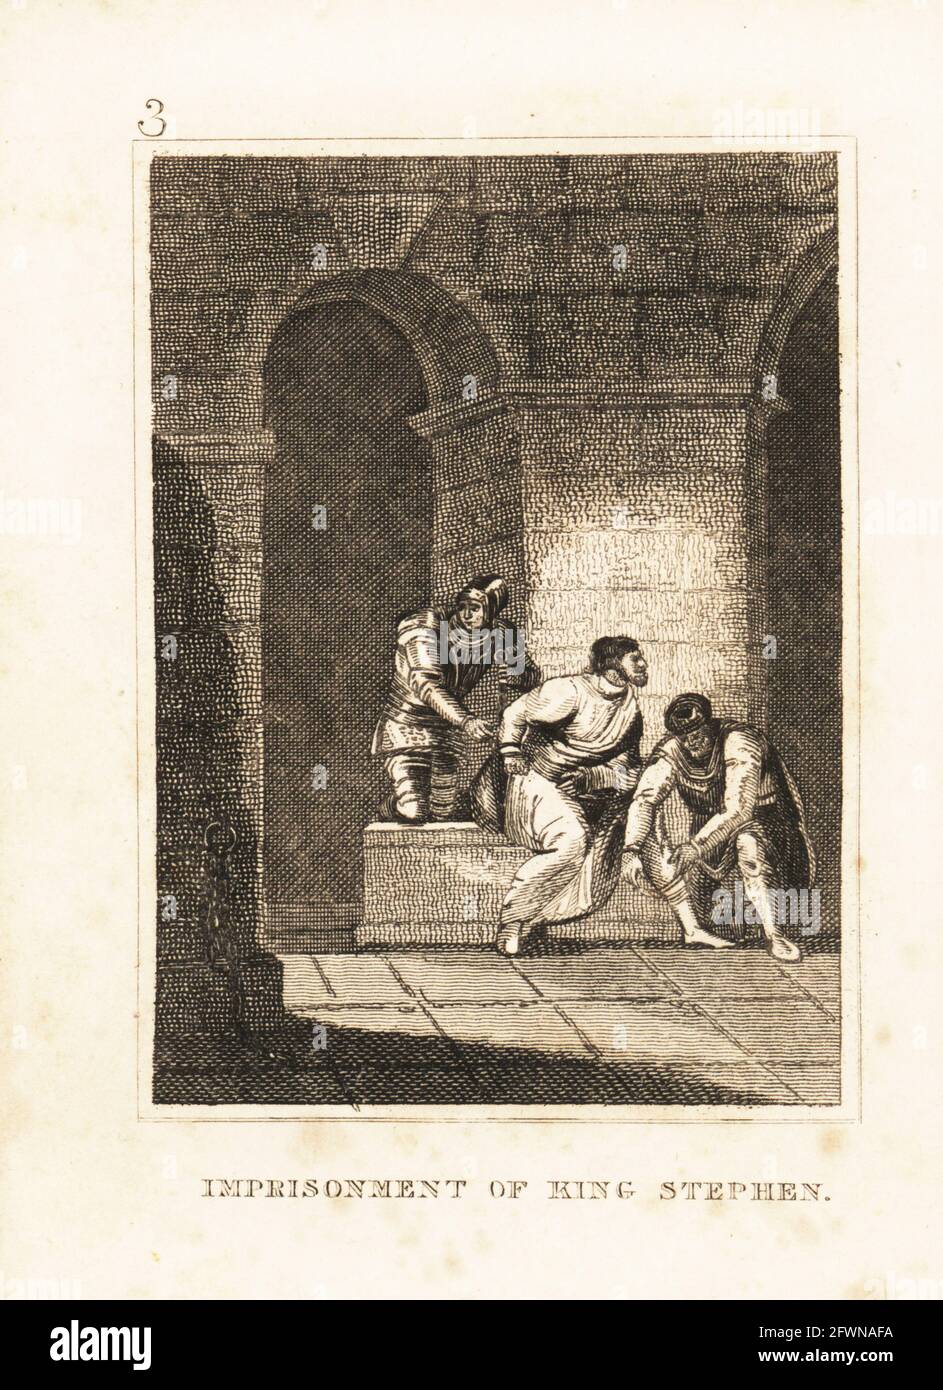 King Stephen in chains in a dungeon in Bristol Castle, 1141. He was captured by Robert Earl of Gloucester and Empress Matilda. Imprisonment of King Stephen. Copperplate engraving from M. A. Jones’ History of England from Julius Caesar to George IV, G. Virtue, 26 Ivy Lane, London, 1836. Stock Photo